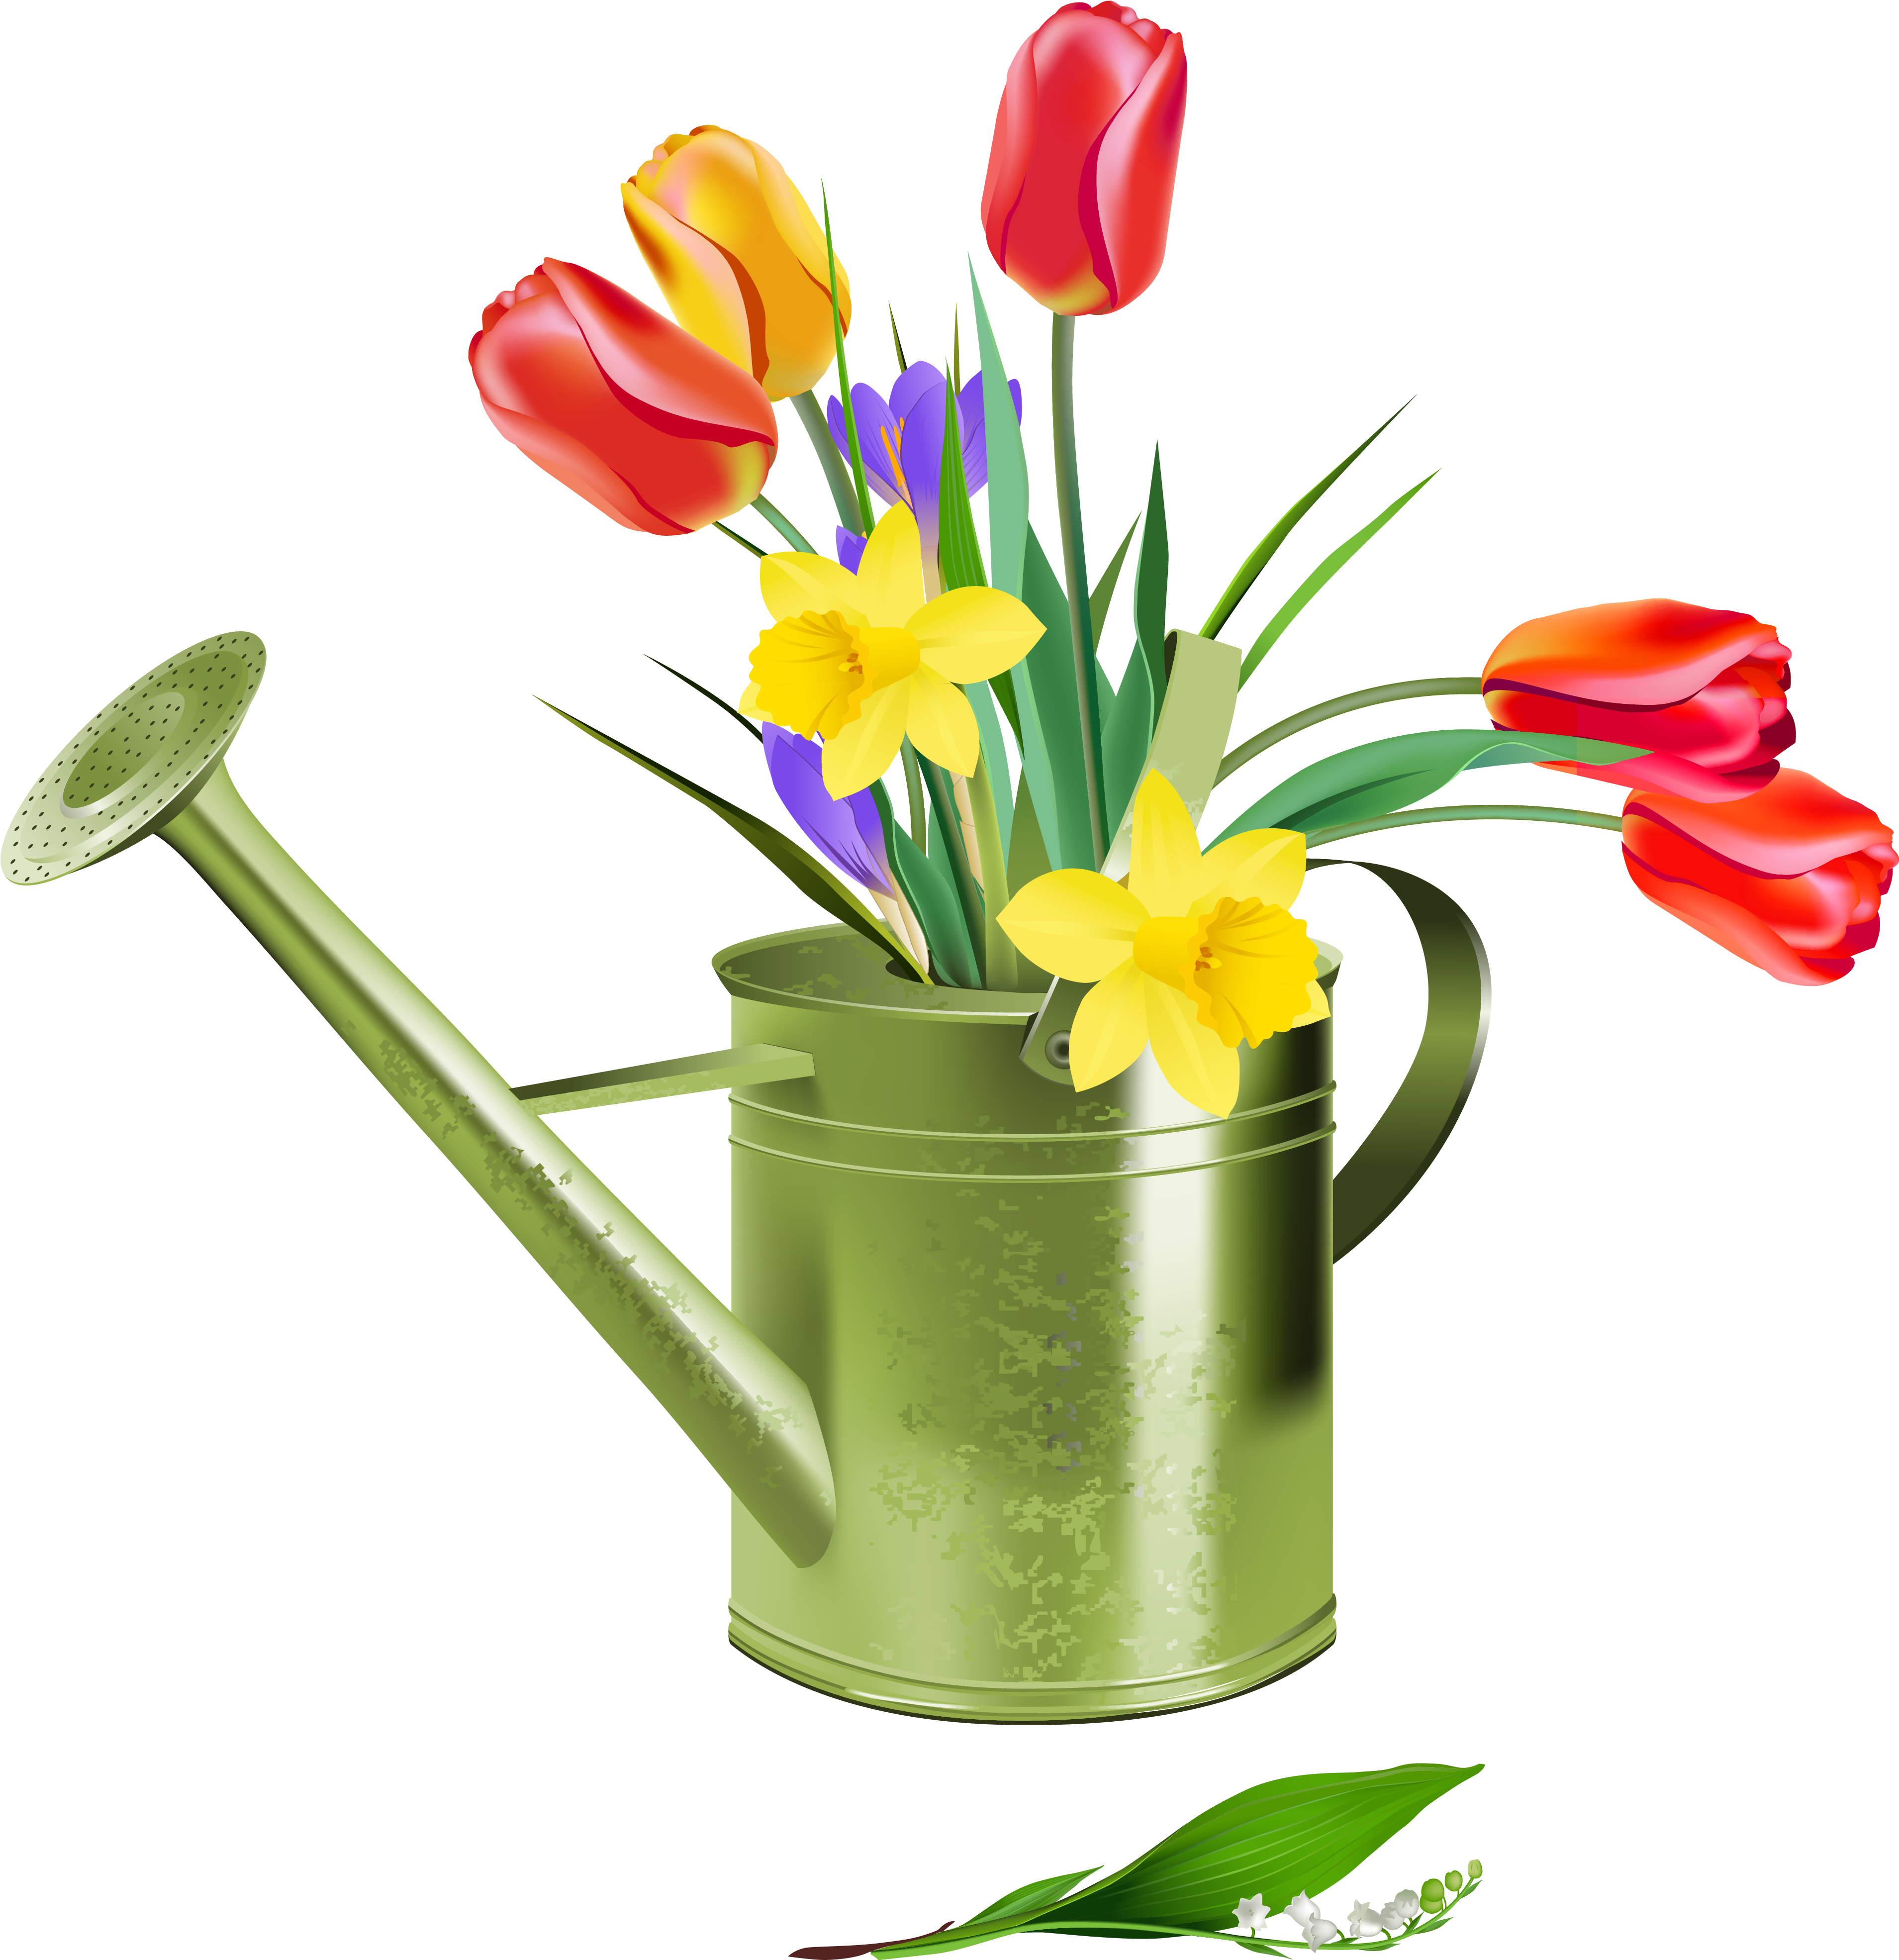 A Watering Can With Flowers